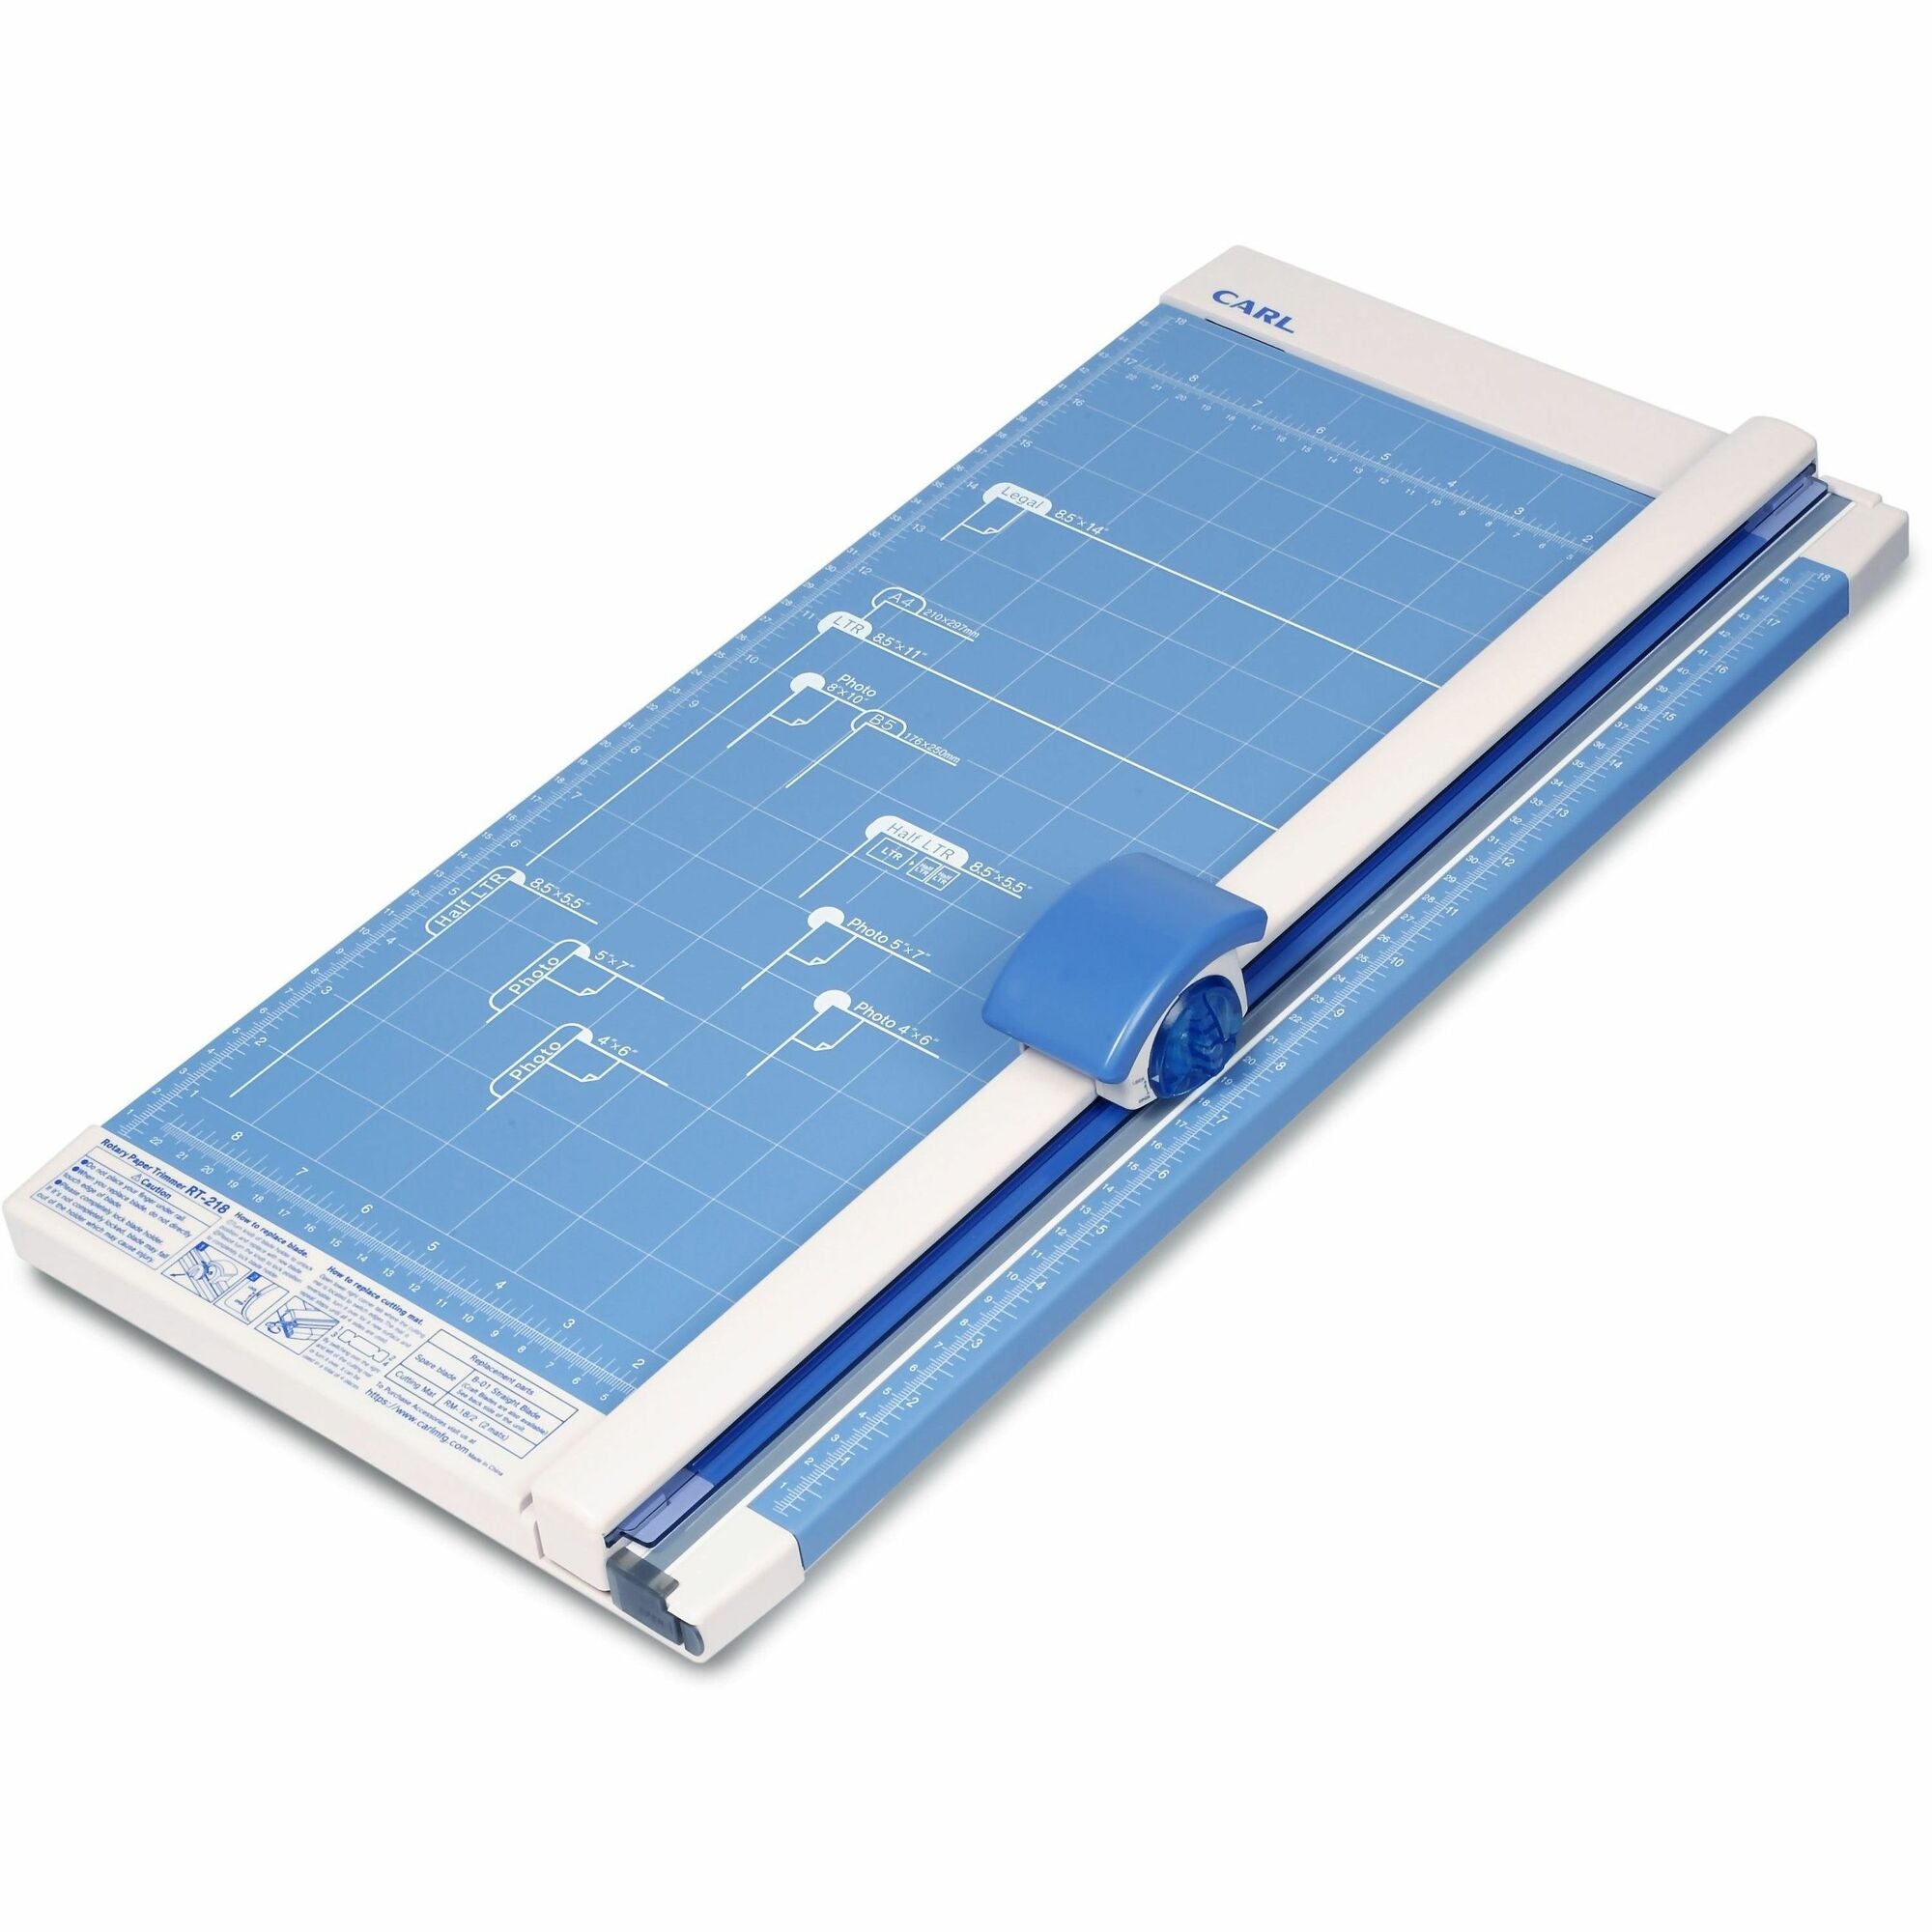 CARL 18" Professional Paper Trimmer - Cuts 10Sheet - 18" Cutting Length - Straight Cutting - 0.8" Height x 10.3" Width x 18" Depth - White - 1